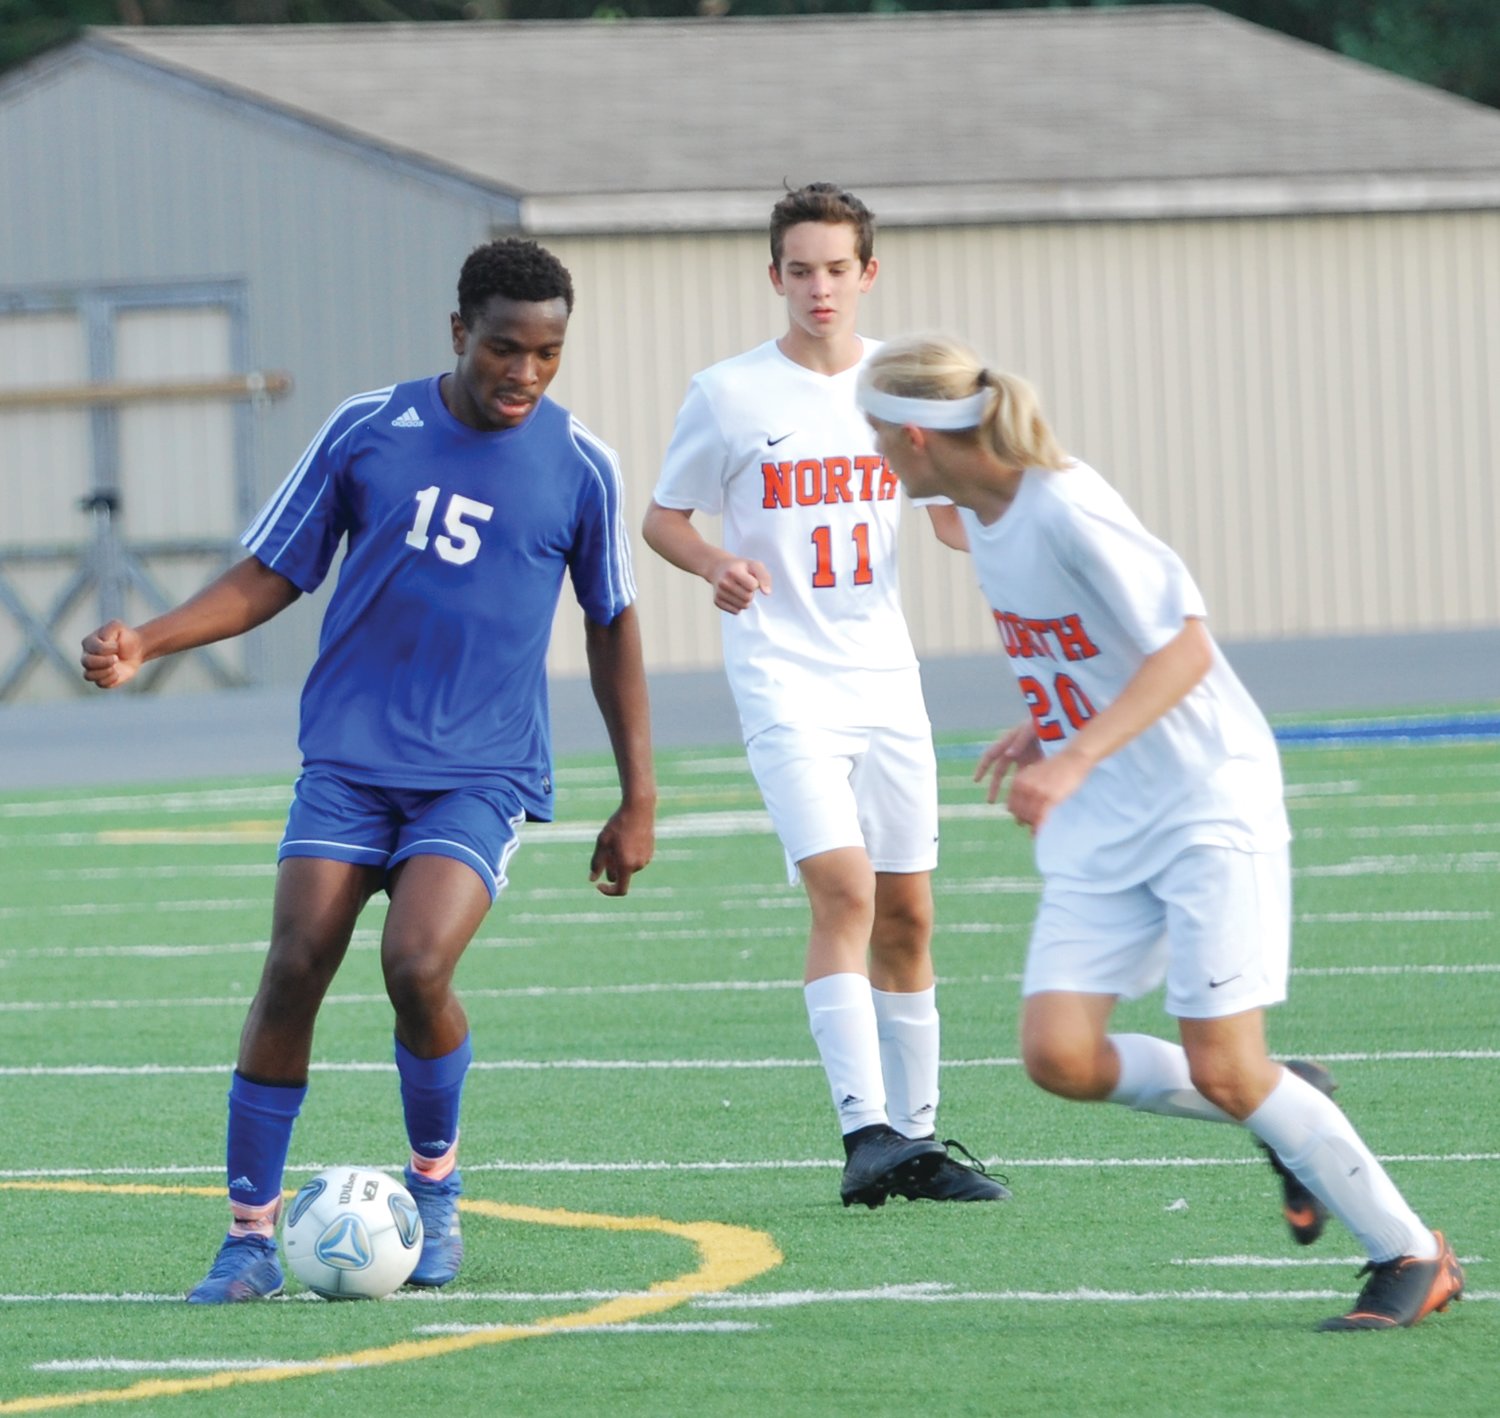 Crawfordsville’s Emmett Bowman led the Athenians with a pair of goals and an assist in a 13-0 win over North Montgomery on Wednesday.